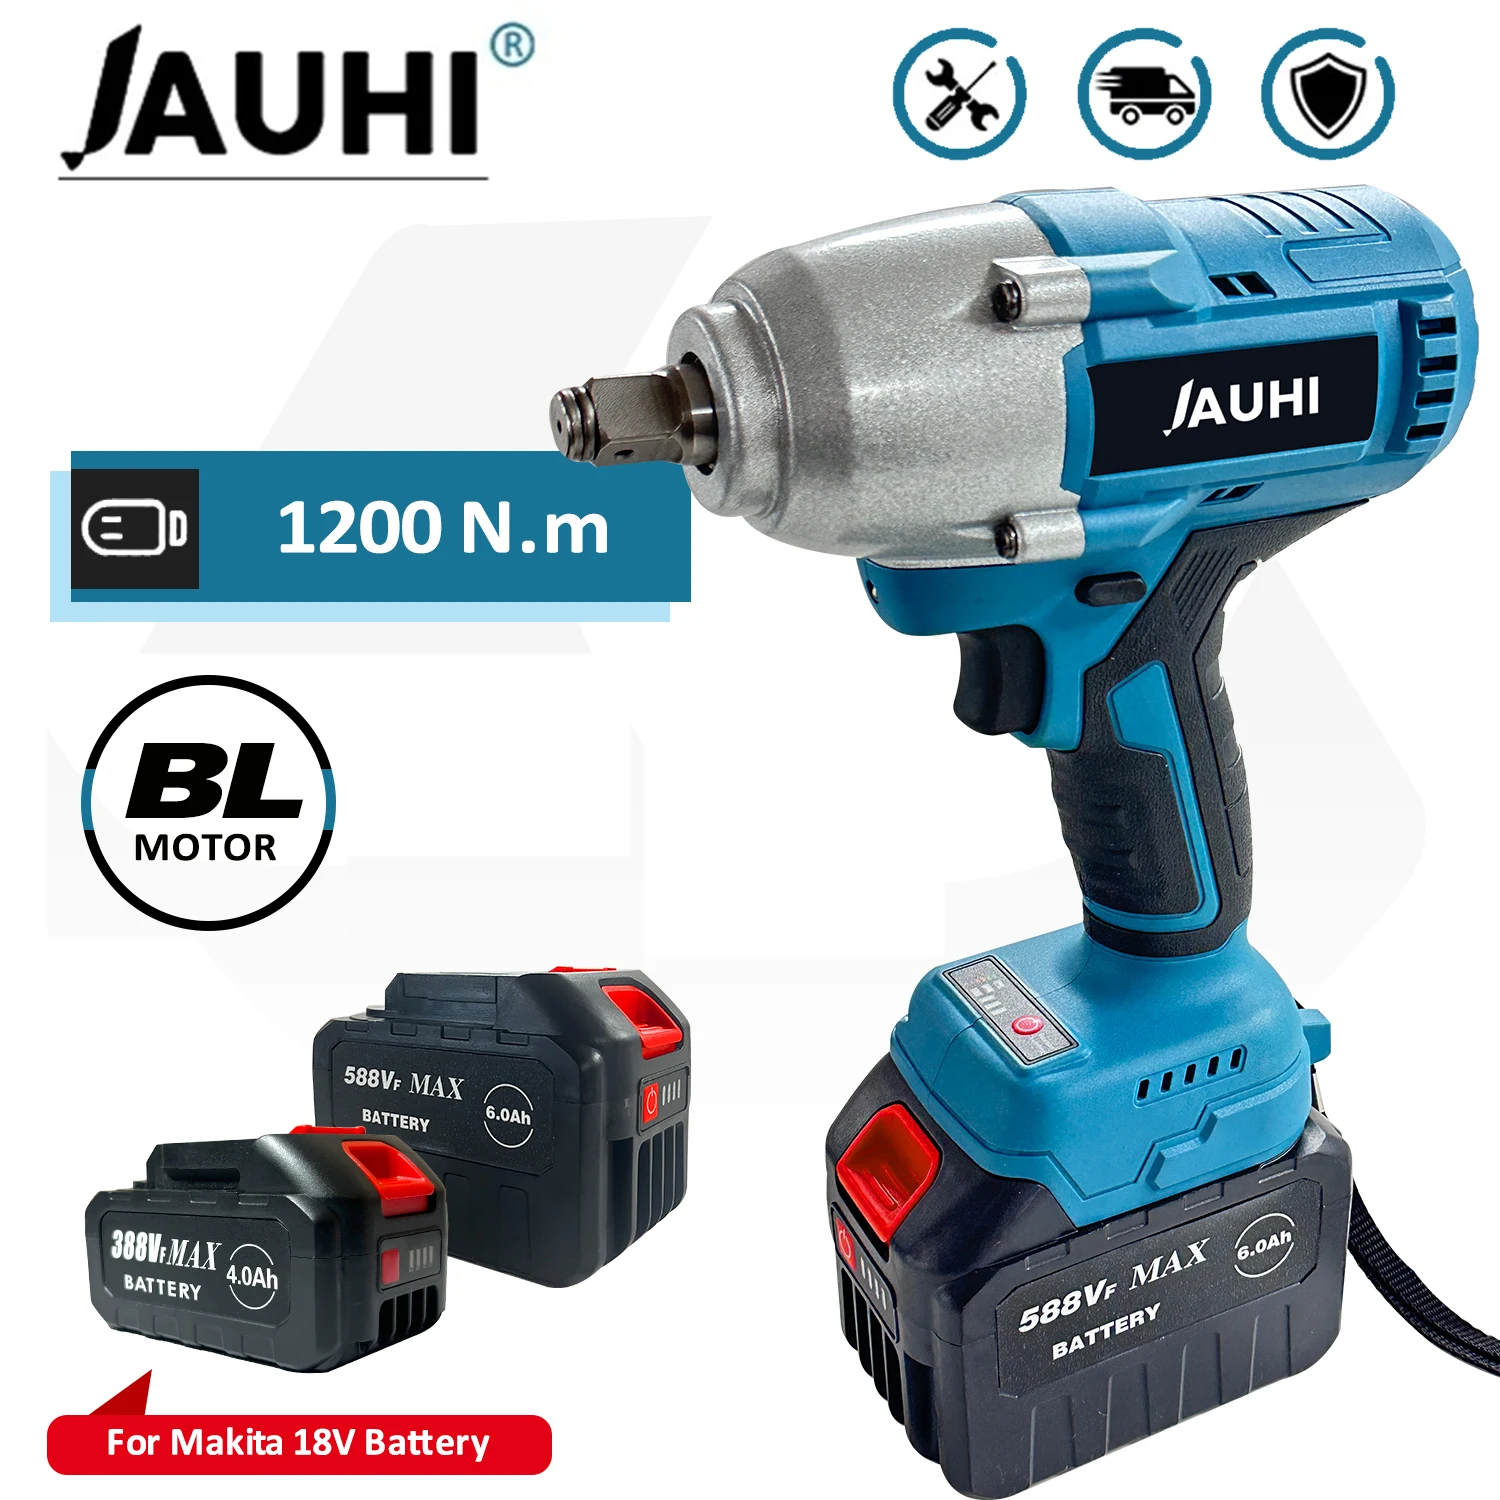 

JAUHI 1/2 Inch 1200N.M Torque Brushless Electric Impact Wrench Cordless Electric Wrench Power Tools For Makita 18V Battery